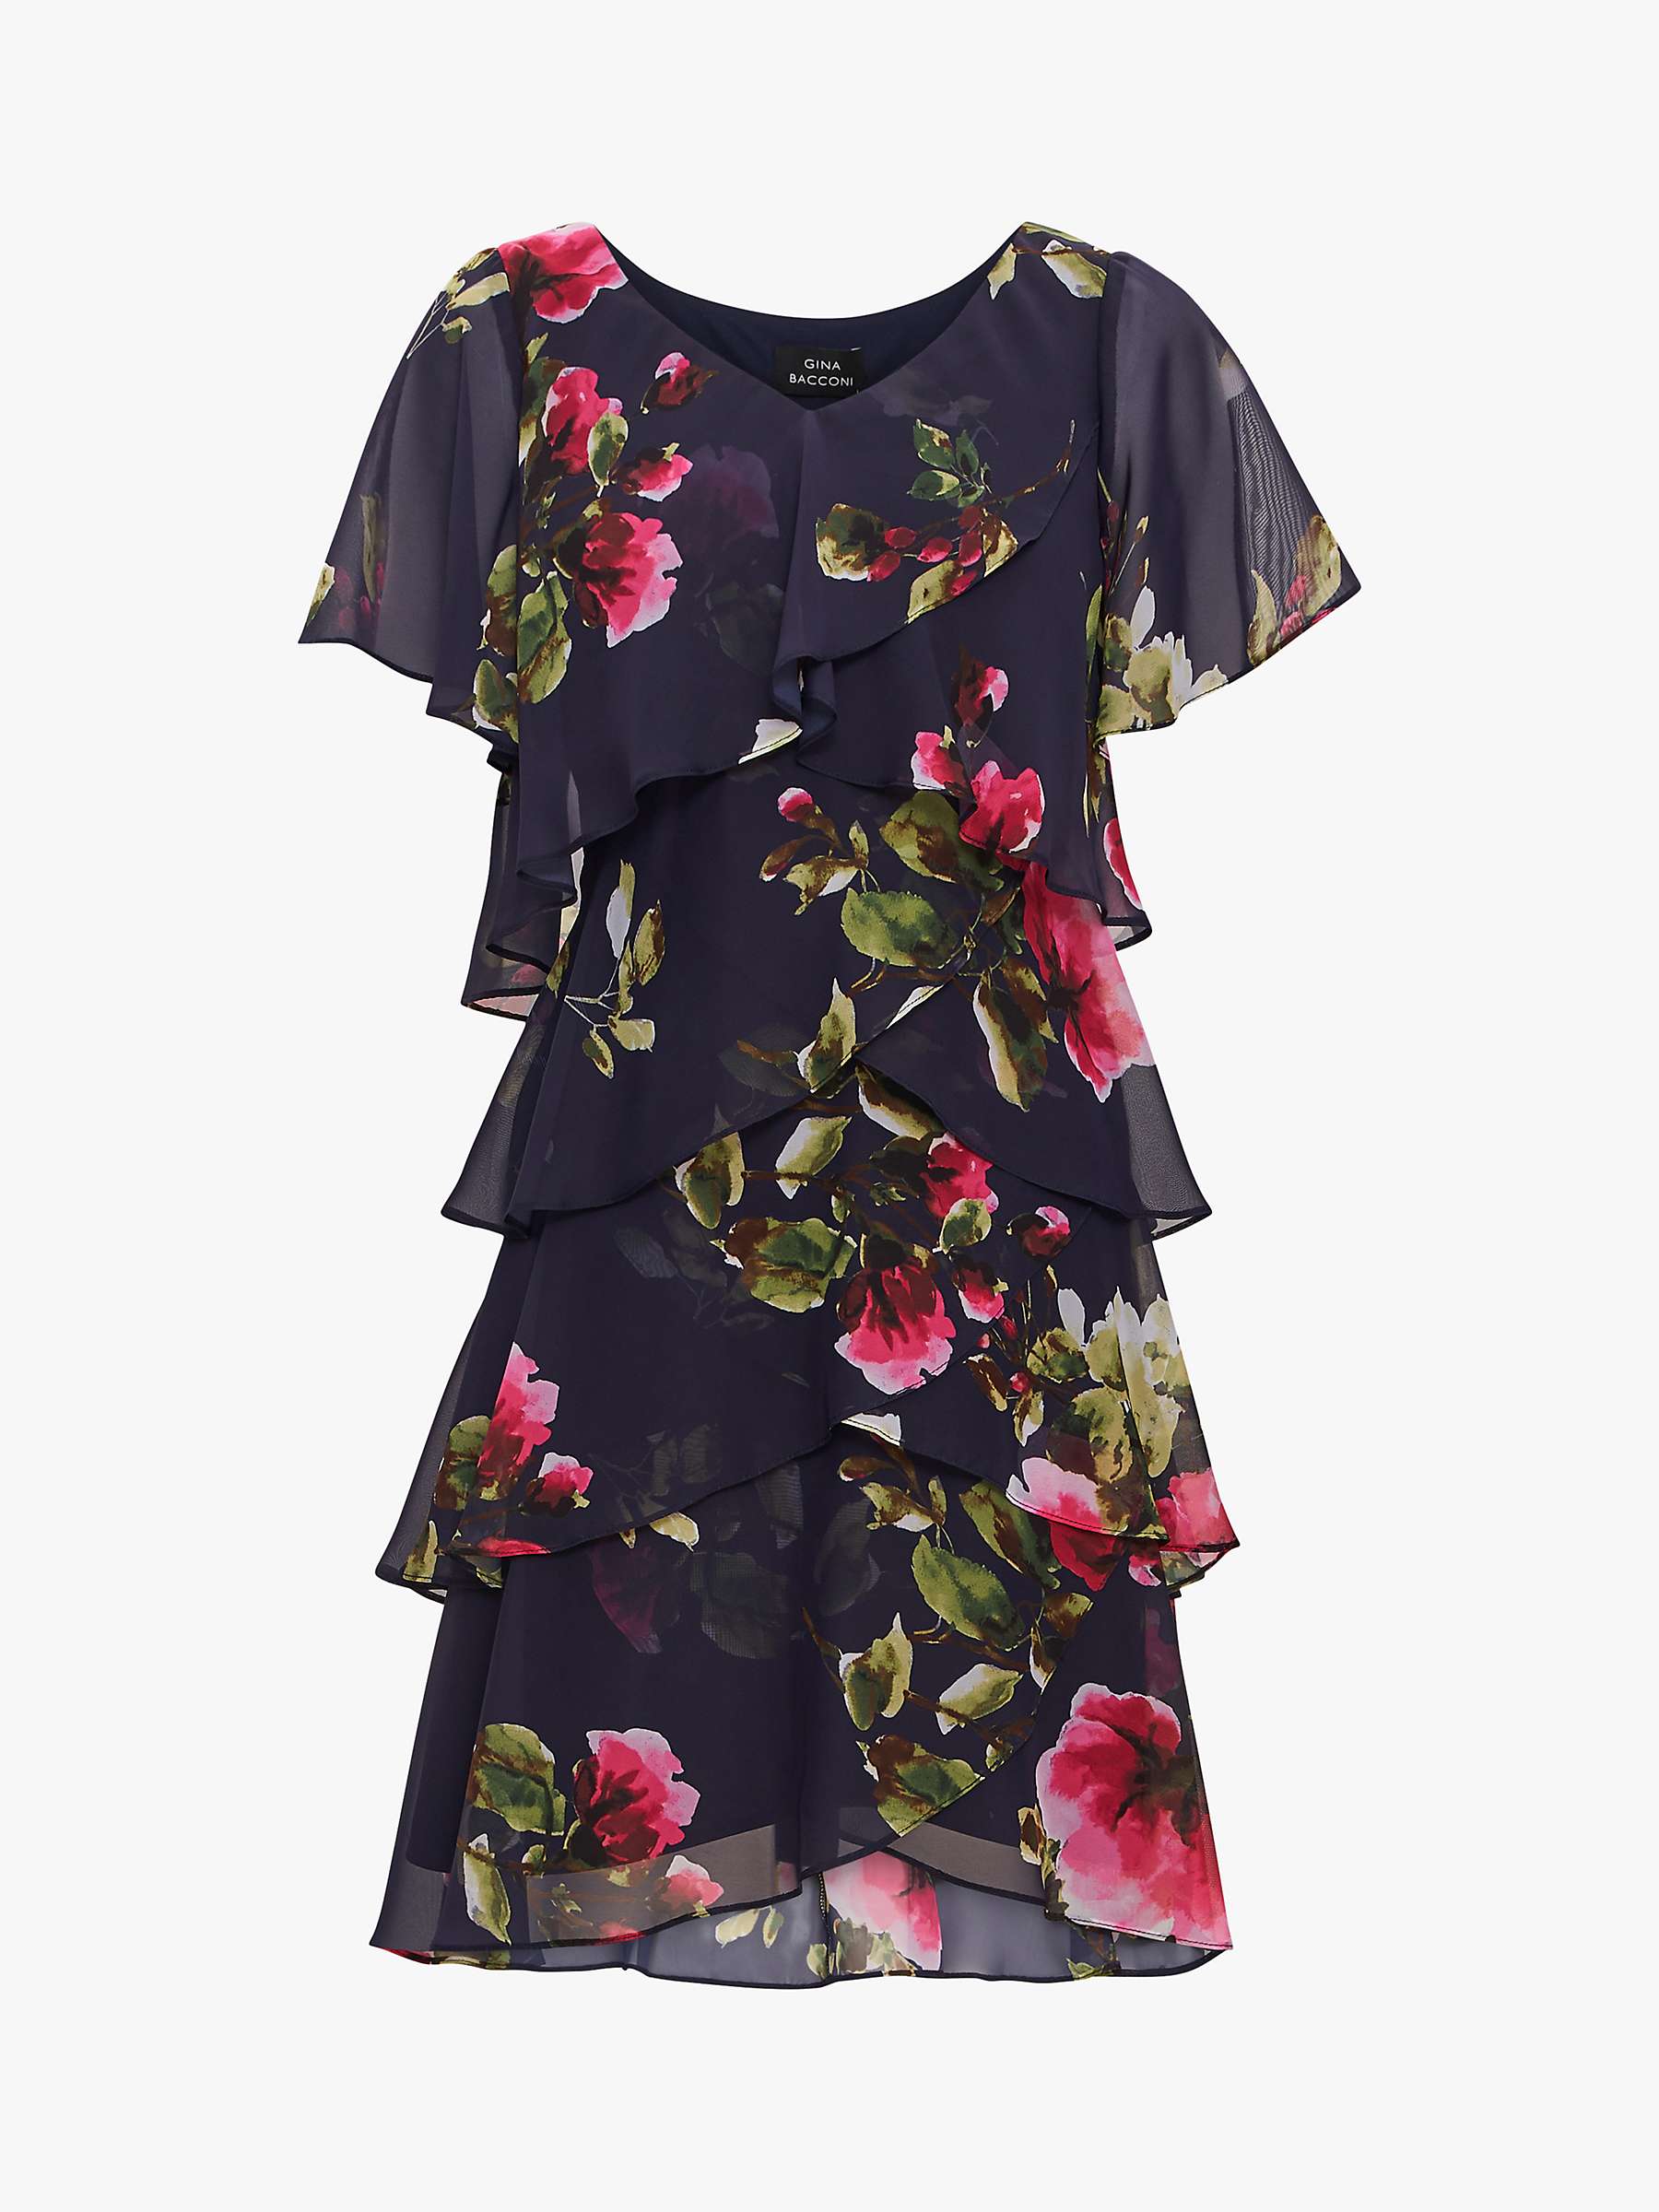 Buy Gina Bacconi Cory Floral Layered Dress, Navy/Multi Online at johnlewis.com